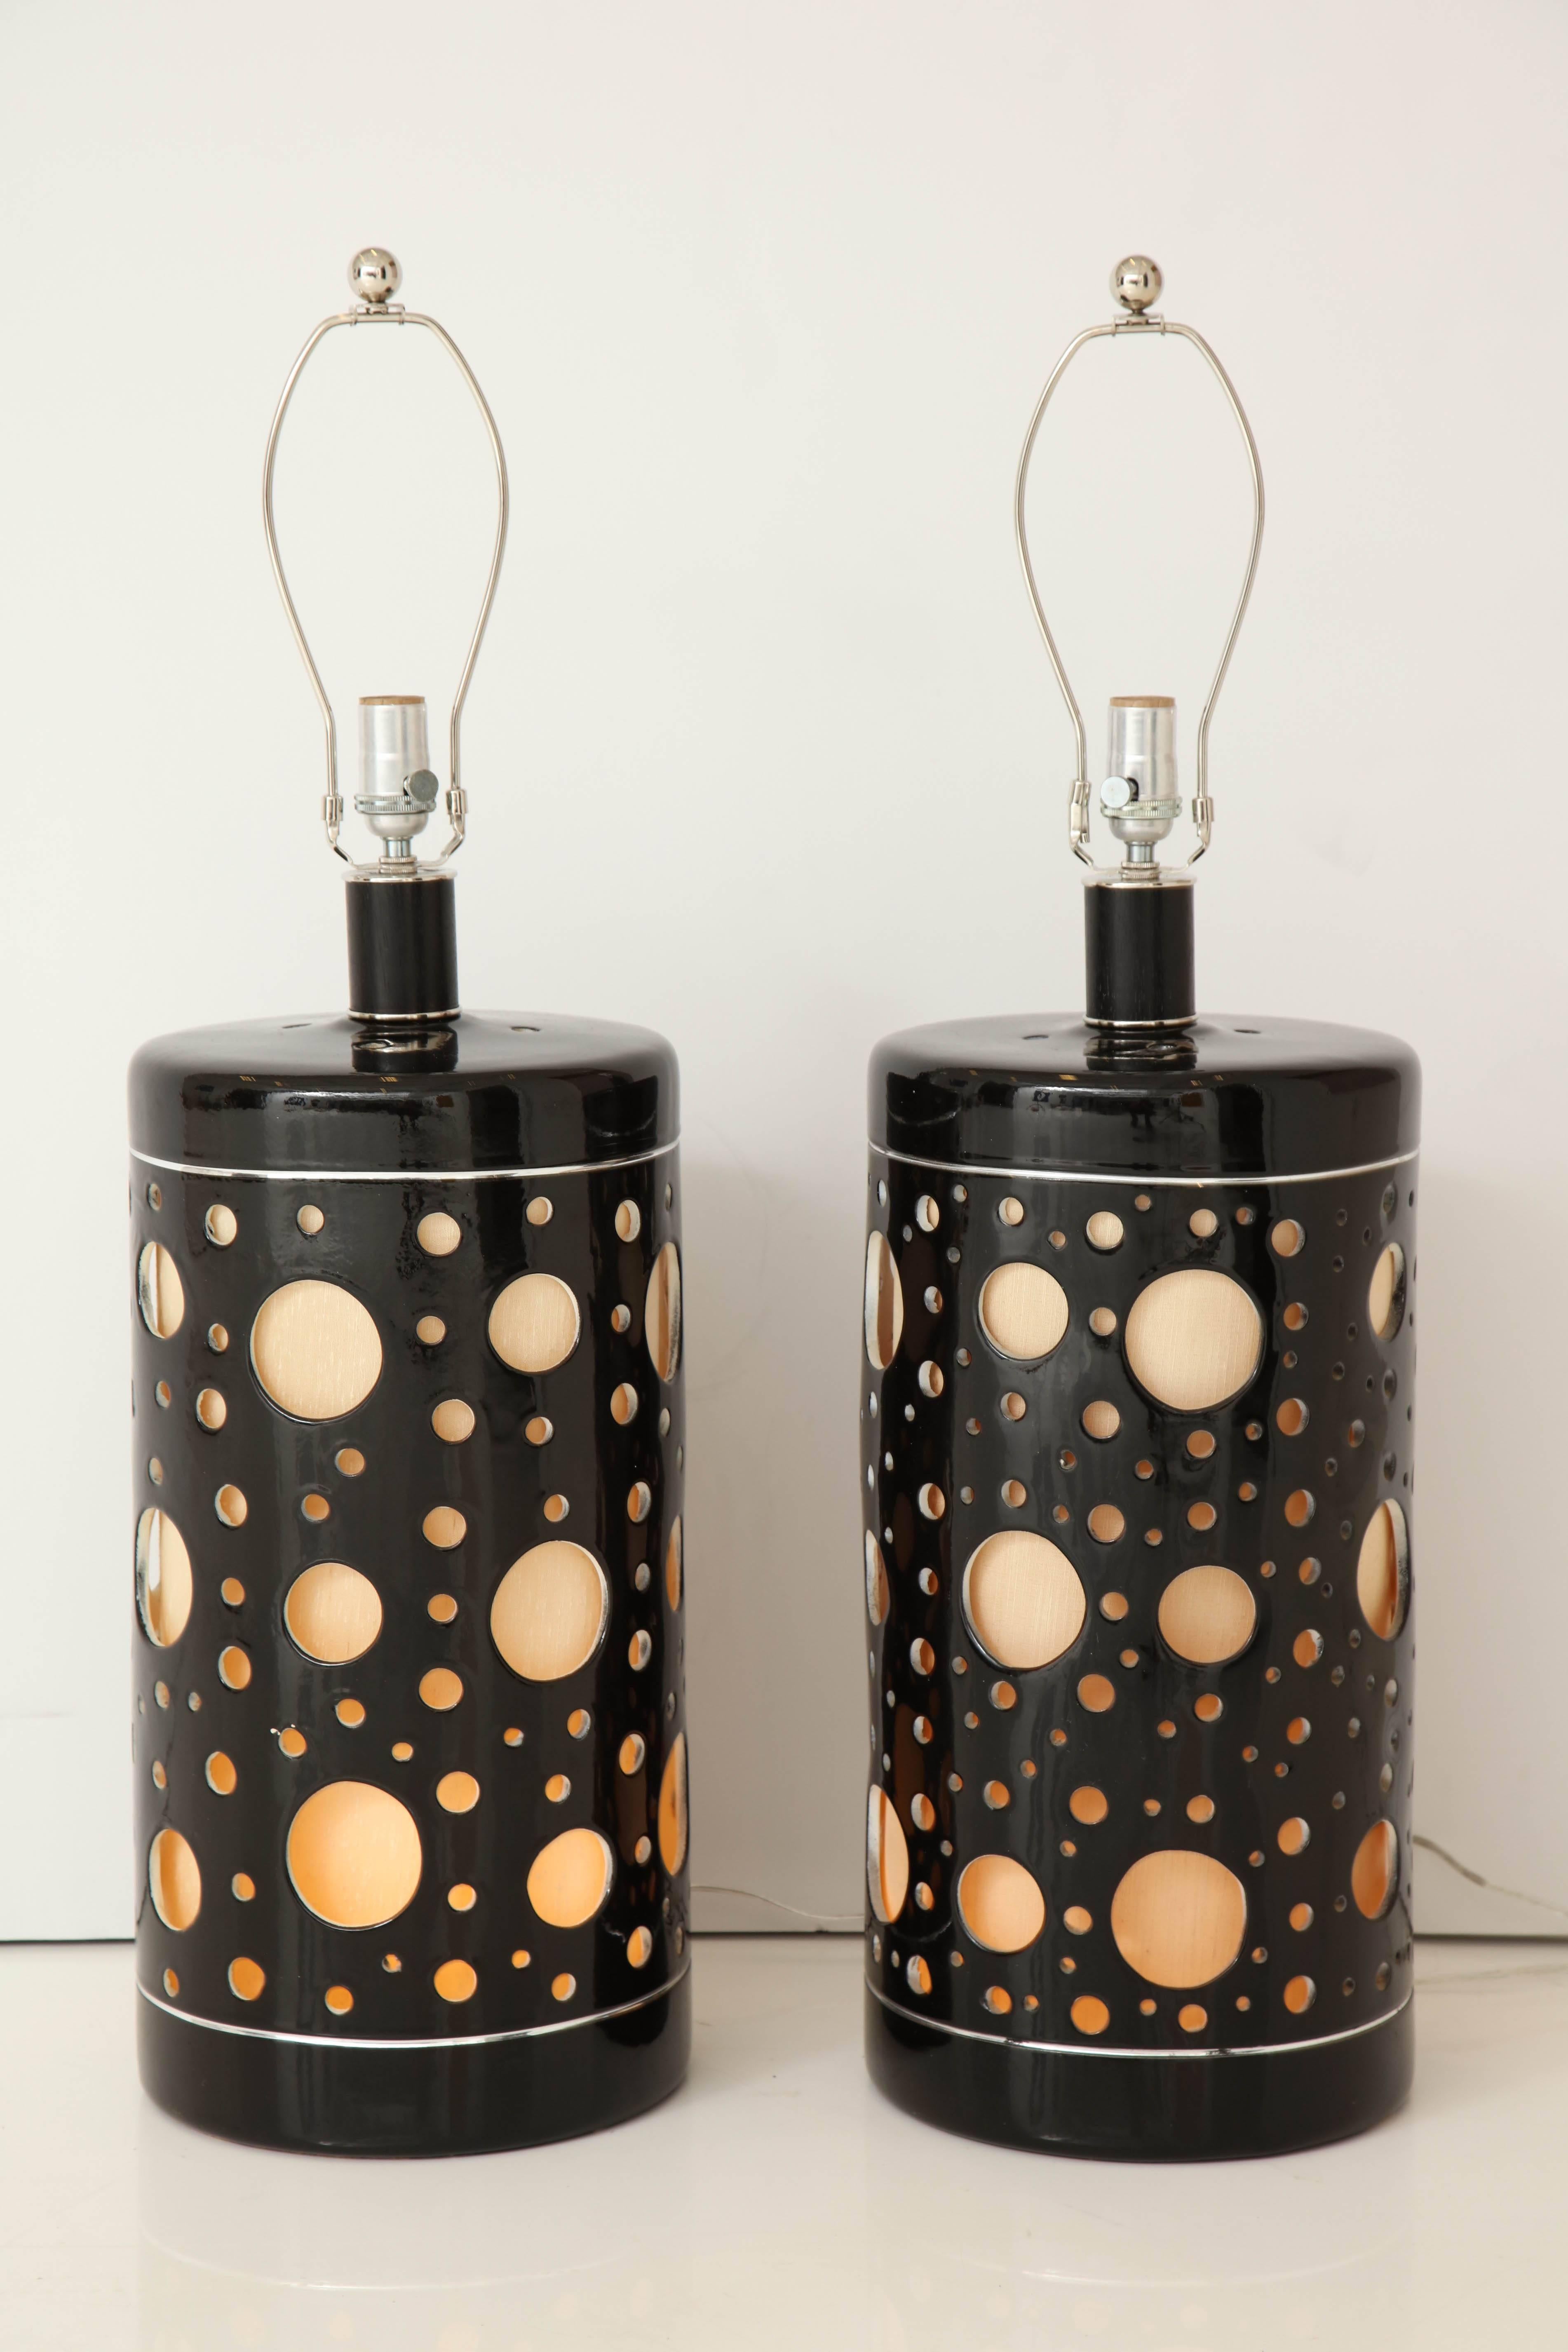 Stunning pair of Iarge 1970's Italian ceramic lamps.
The lamp bodies have varying sized cut out holes which are highlighted by the inner shade which illuminates.
They have been newly rewired for the US and are on a three-way switch.
The height to